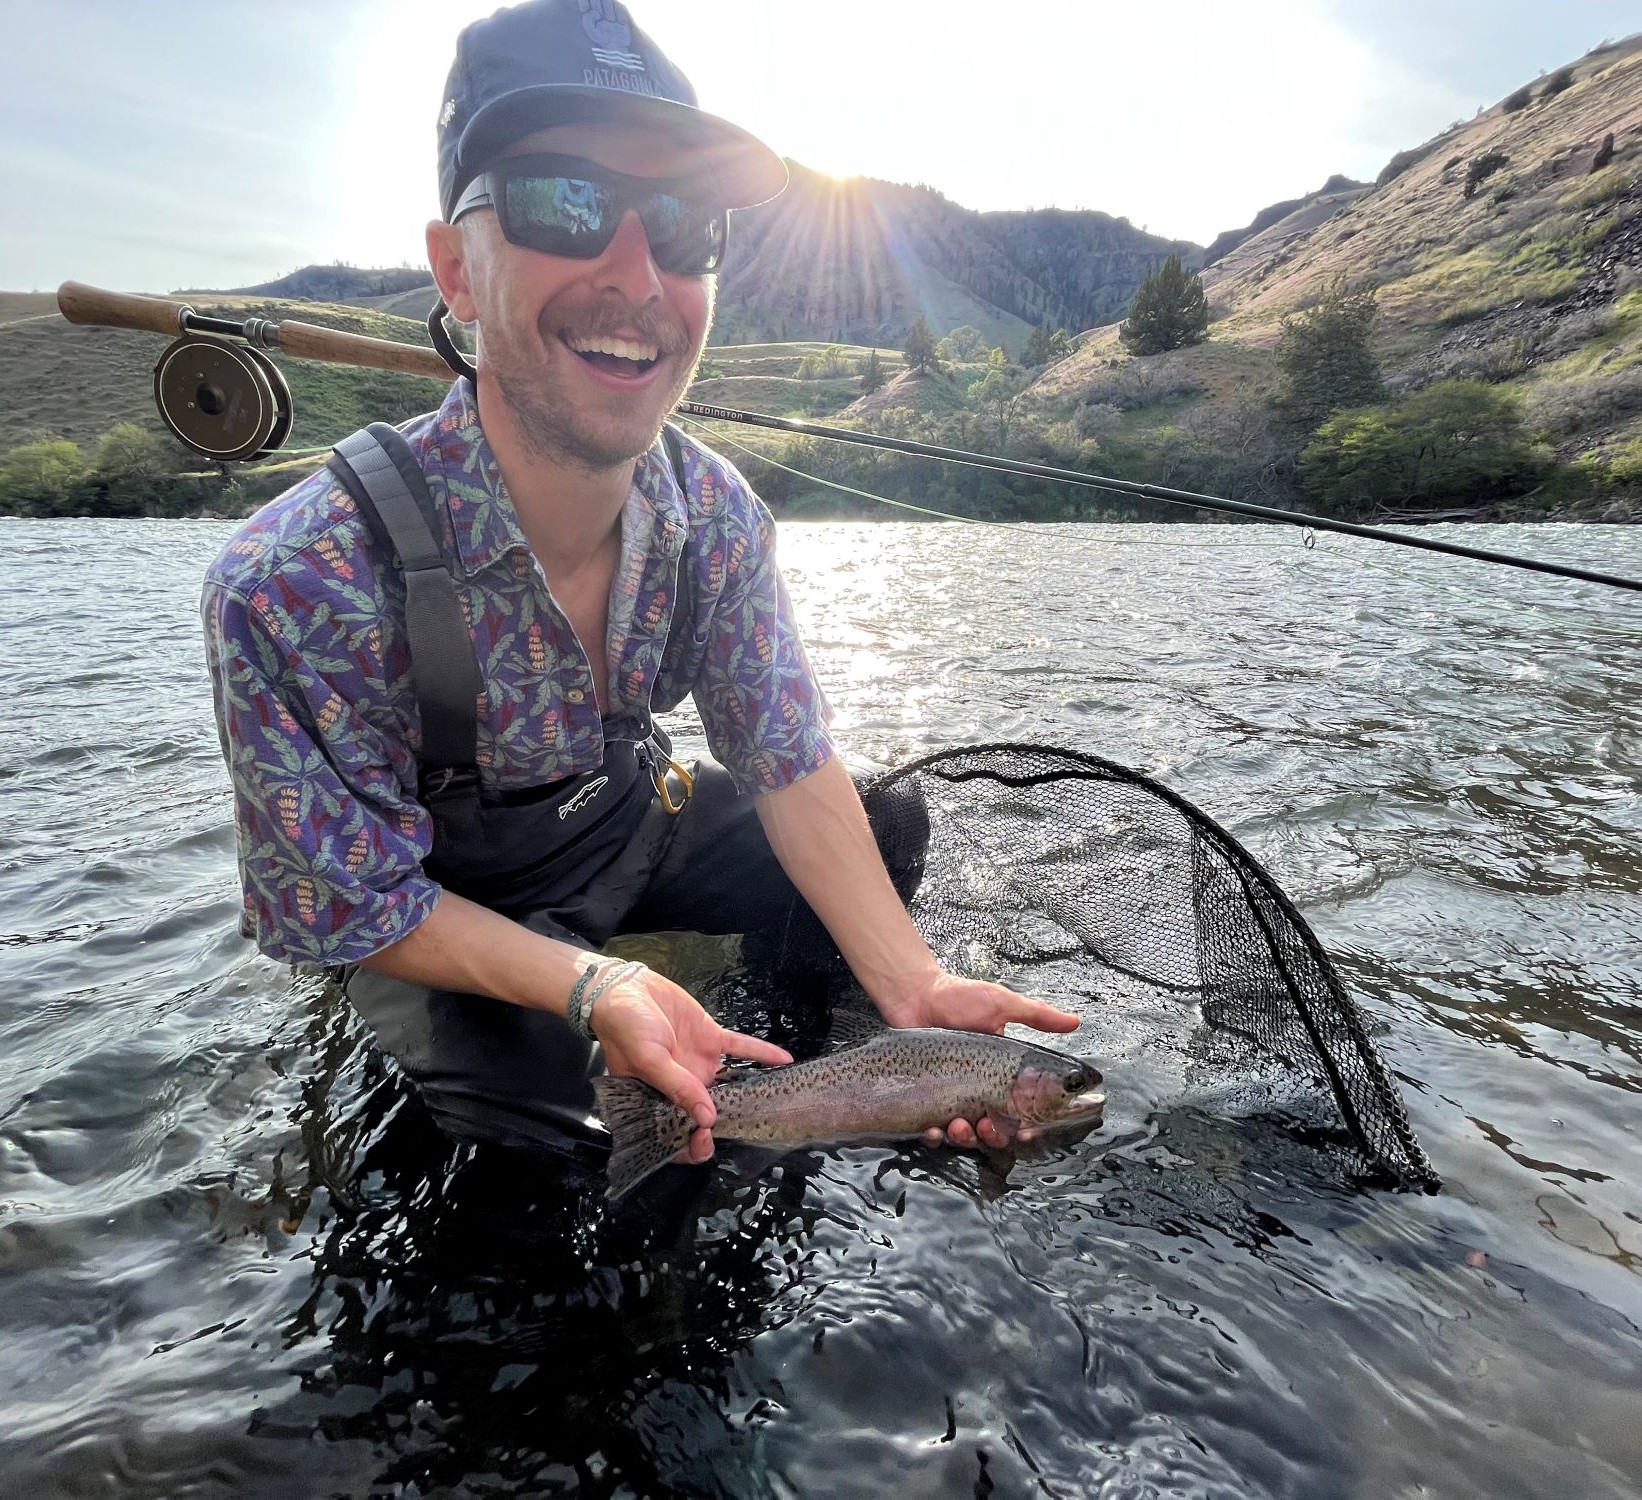 Alex while fly fishing, holding a deschutes redband he caught.